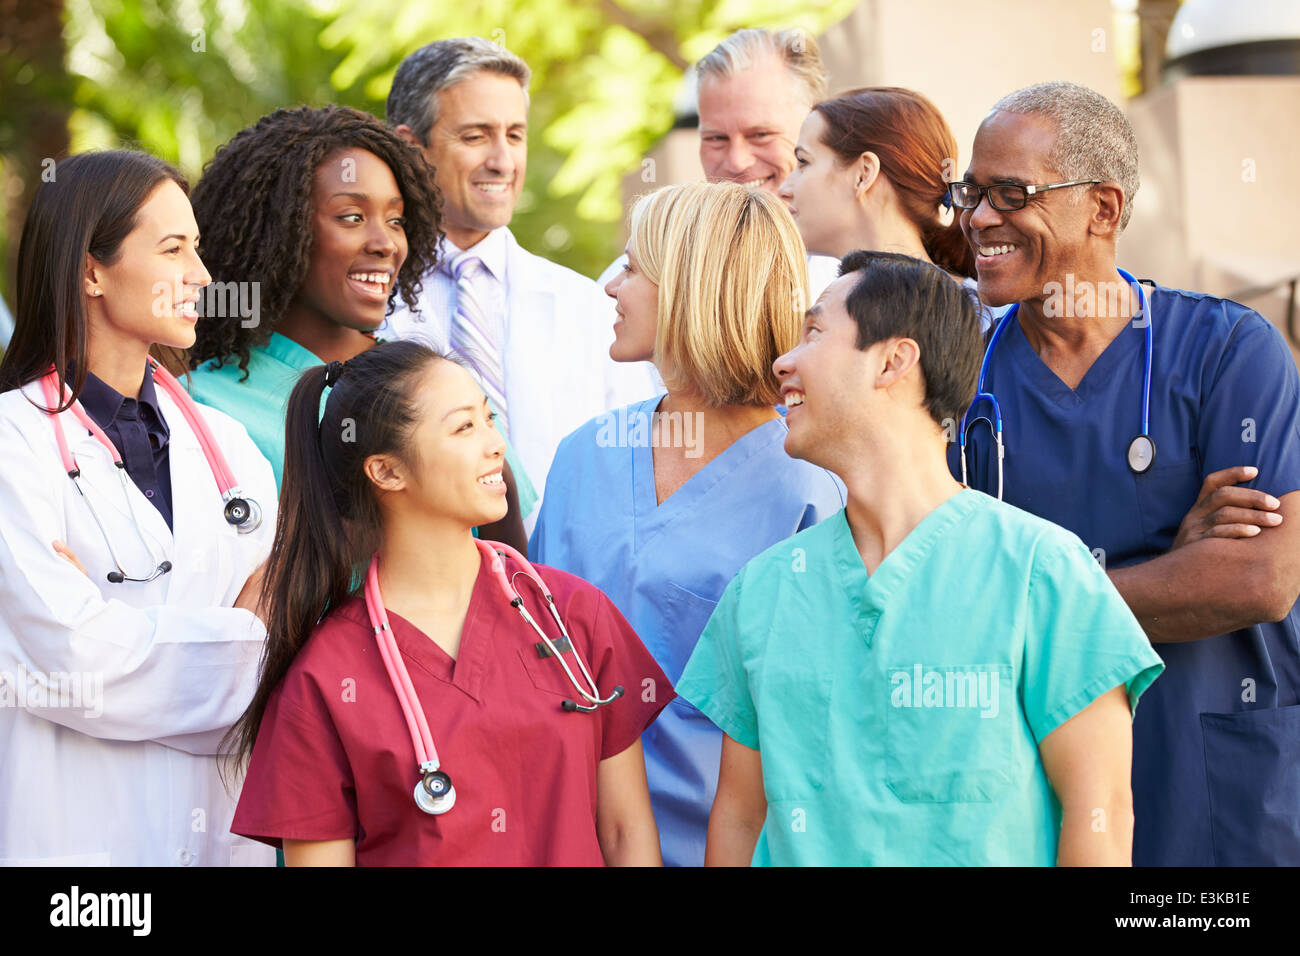 Medical Team Having Discussion Outdoors Stock Photo